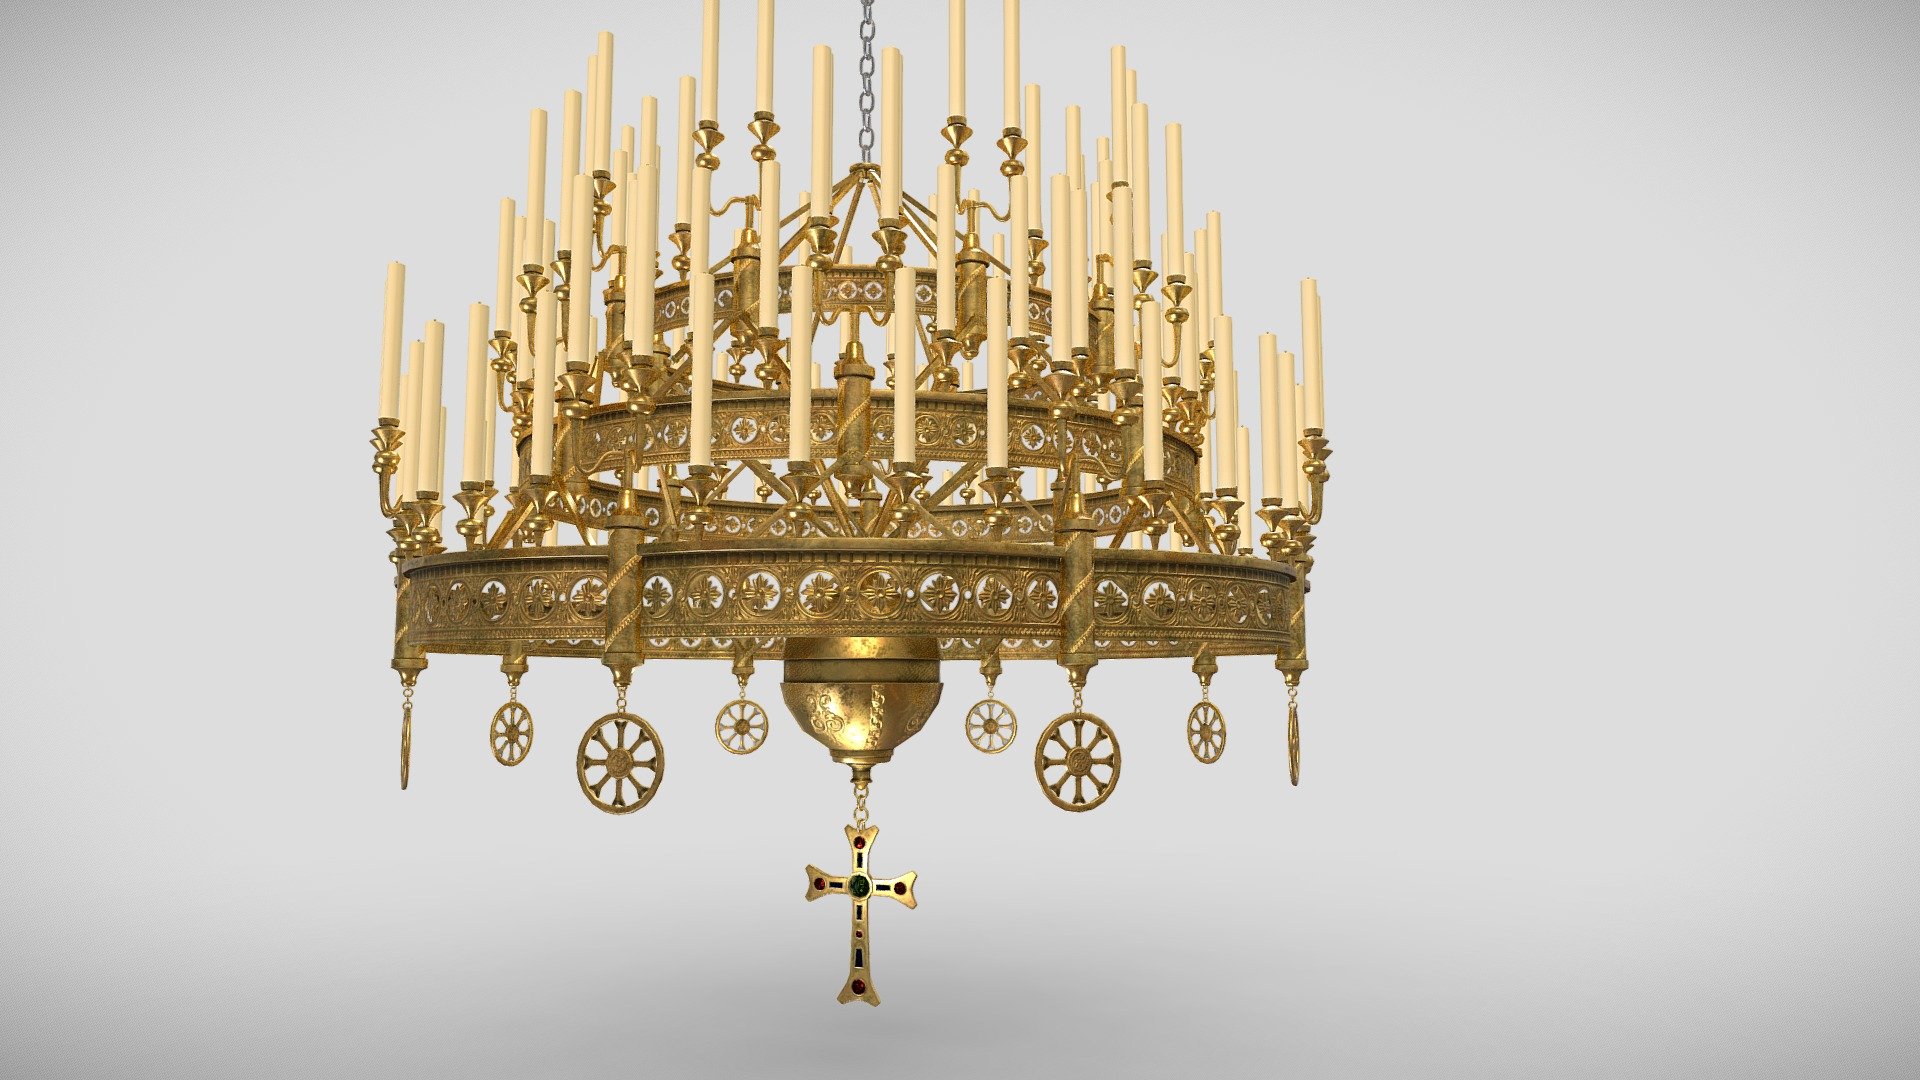 Decorated Victorian chandelier with a Christian cross as the central symbol. As material we chose gold and precious stones to decorate the cross. The candles are then surprisingly made of wax. There are also two types of candles, the first with brand new unused candles and the second with partially burned candles. The chandelier is hung on a long chain finished with a hanging fixture. The model is designed for large spaces such as a cathedral or basilica nave or a large hall. Models have LODs and custom coliders for easy use as game props. Packed Ambient oclusion(R), roughness(G) and metalic(B) and unreal engine 4 project is also included 3d model